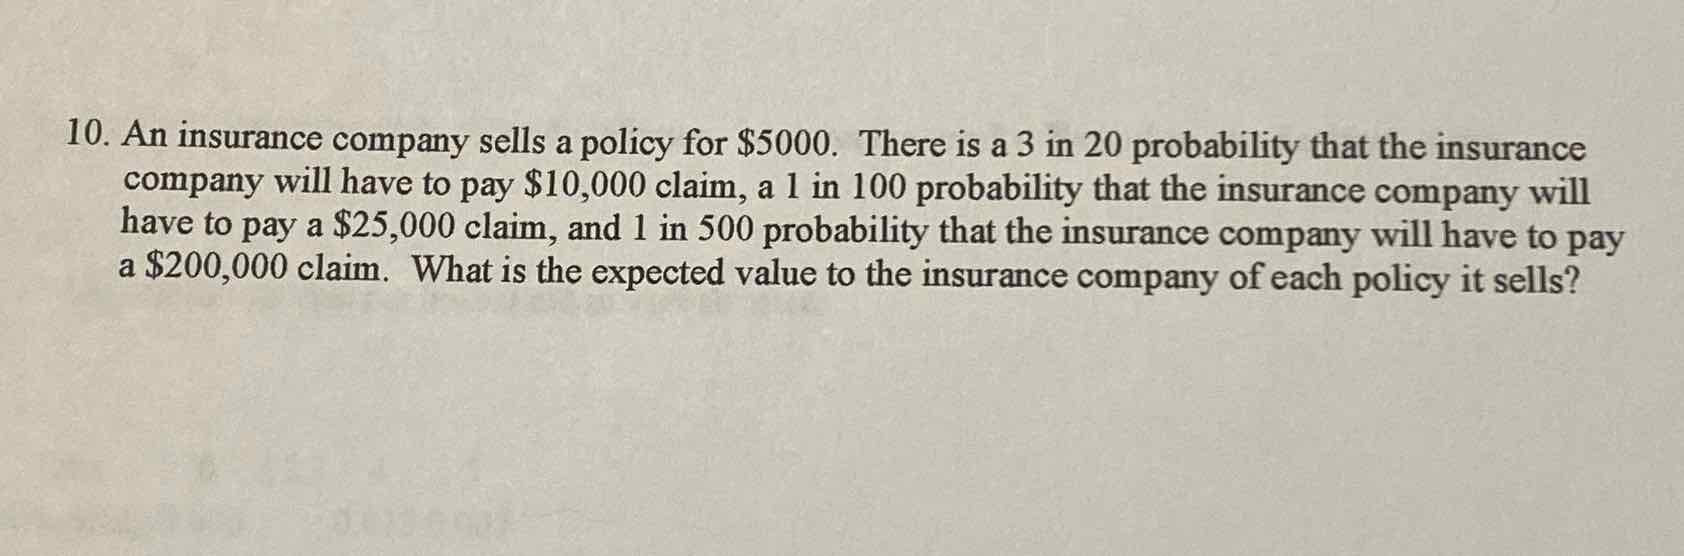 10. An insurance company sells a policy for \( \$ 5000 \). There is a 3 in 20 probability that the insurance company will have to pay \( \$ 10,000 \) claim, a 1 in 100 probability that the insurance company will have to pay a \( \$ 25,000 \) claim, and 1 in 500 probability that the insurance company will have to pay a \( \$ 200,000 \) claim. What is the expected value to the insurance company of each policy it sells?